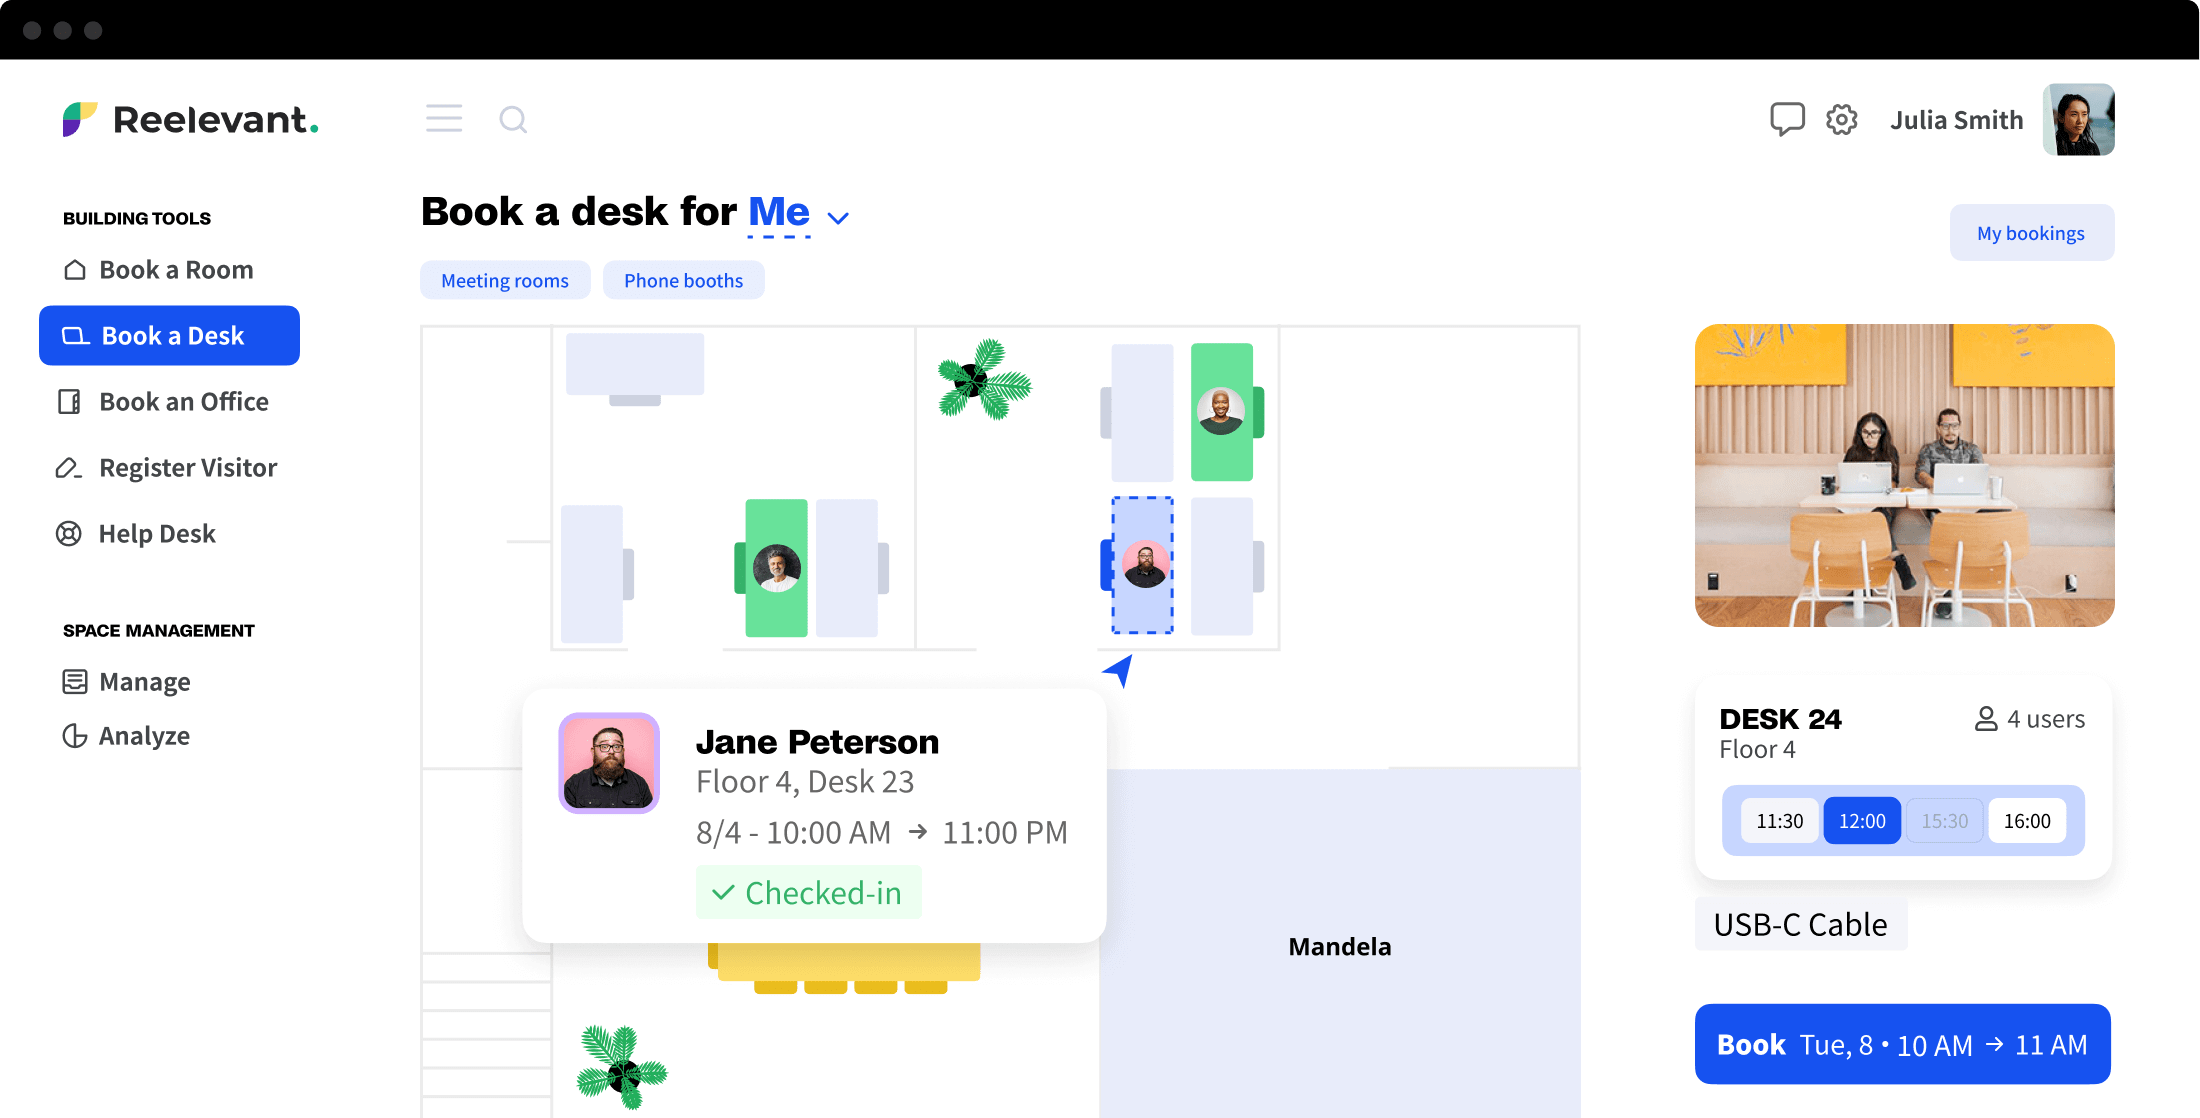 Archie's management software "book a room" display view with a floor plan